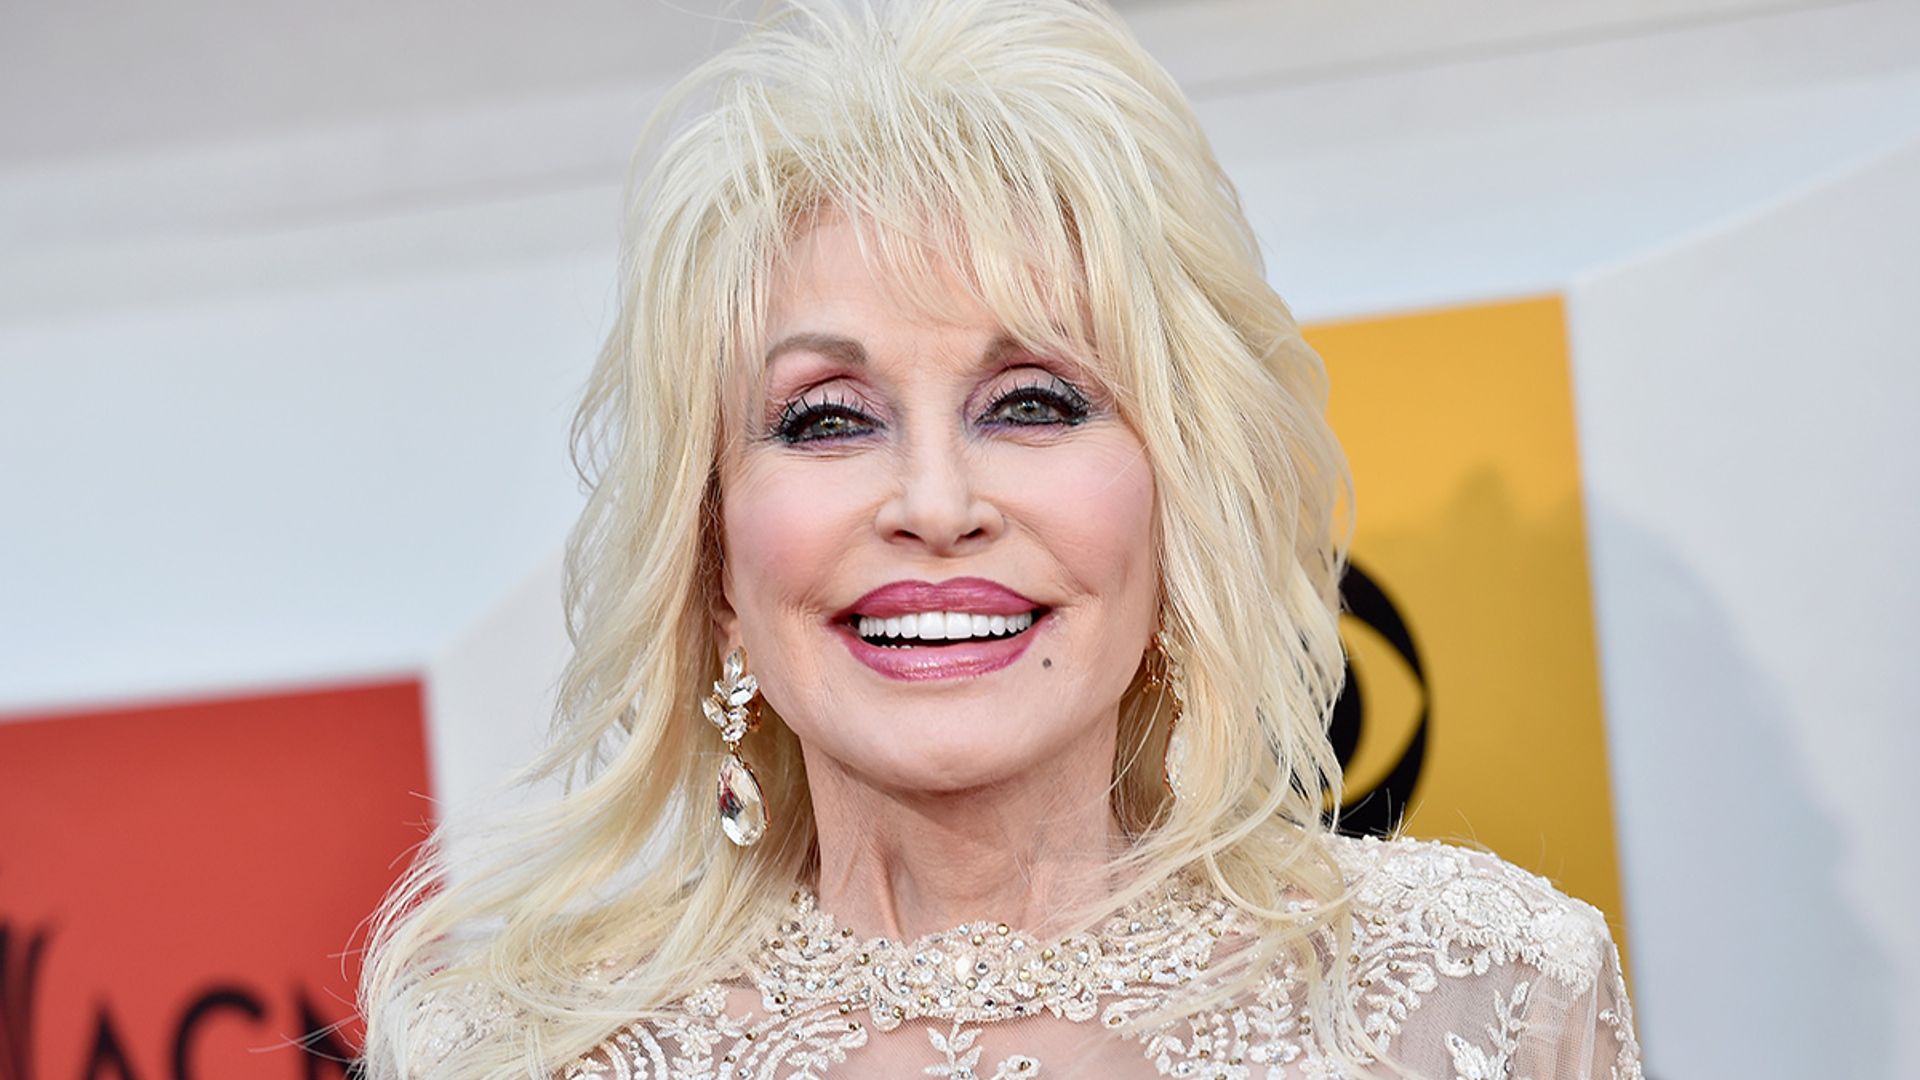 Before and After Photos of Dolly Parton's Plastic Surgery